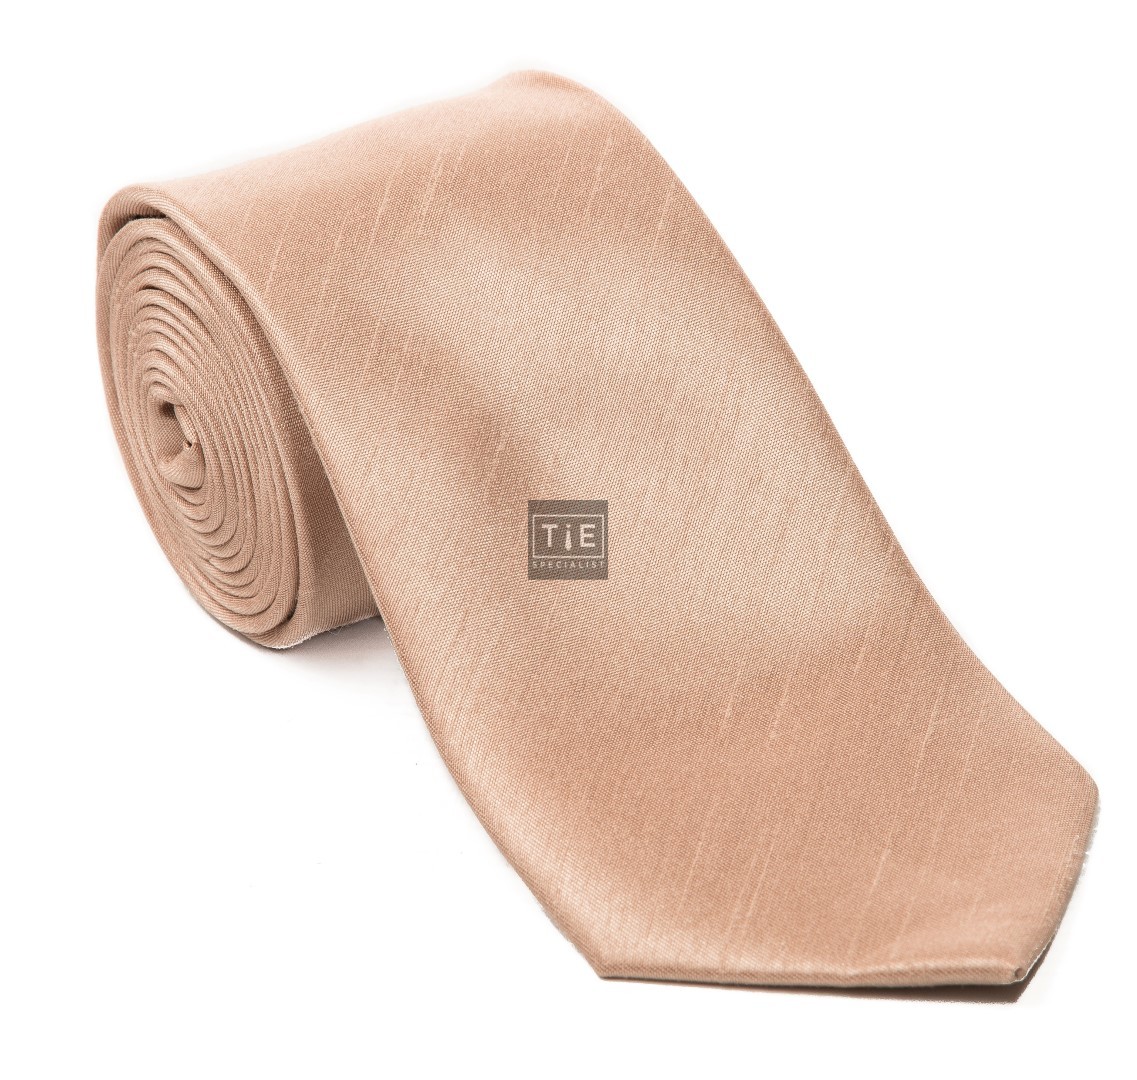 Champagne Shantung Tie with Matching Pocket Hankie